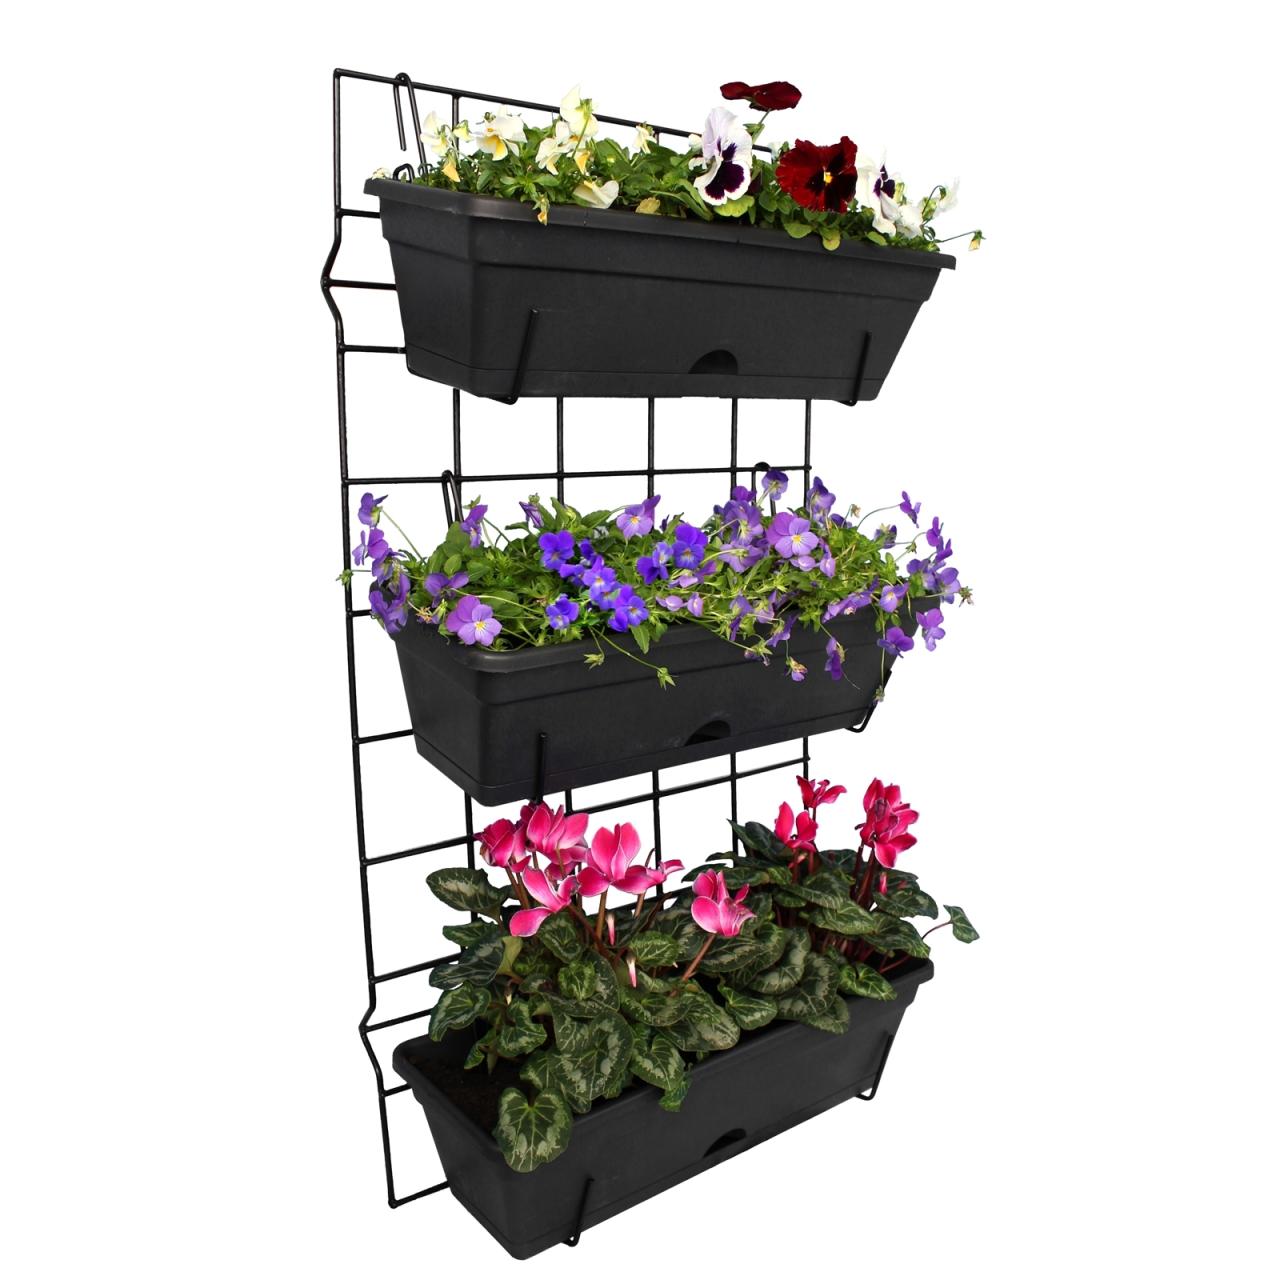 Hanging Plants Indoor | Hanging Planter Bunnings: A Guide to Choosing and Caring for Your Hanging Planters